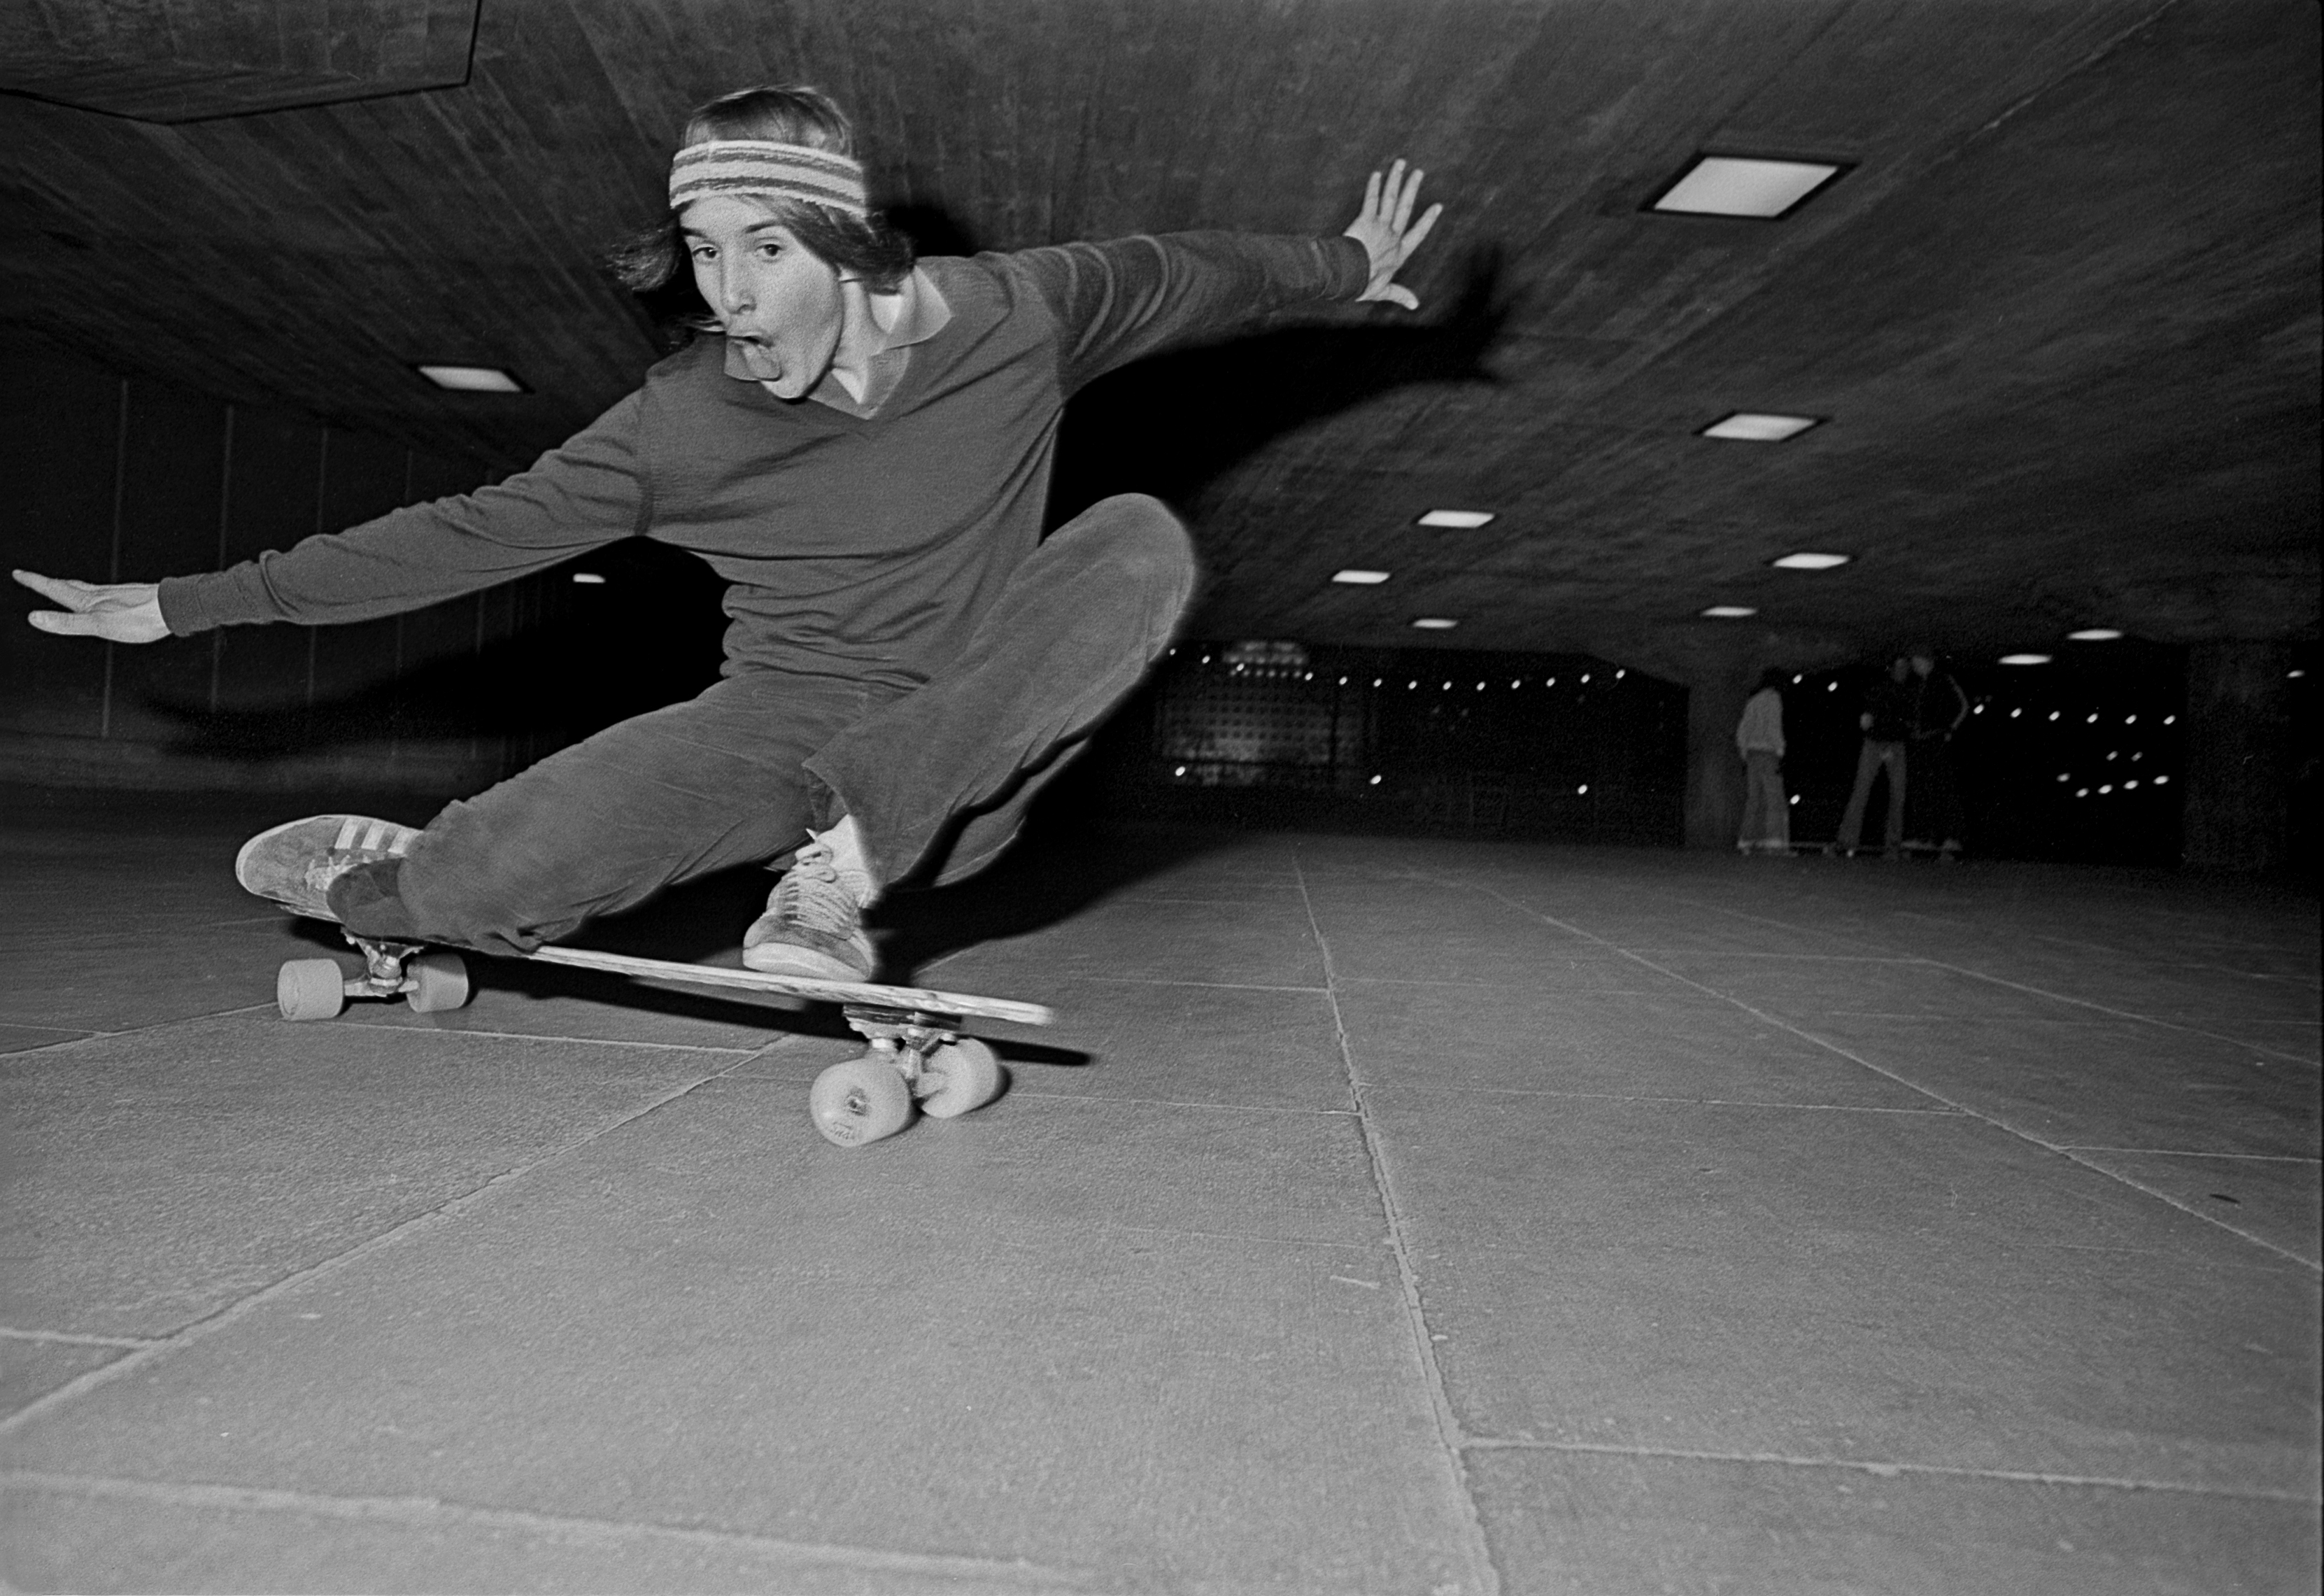 50 Years of British Skateboarding: An Exhibition Celebrating the Legacy of the 1970s